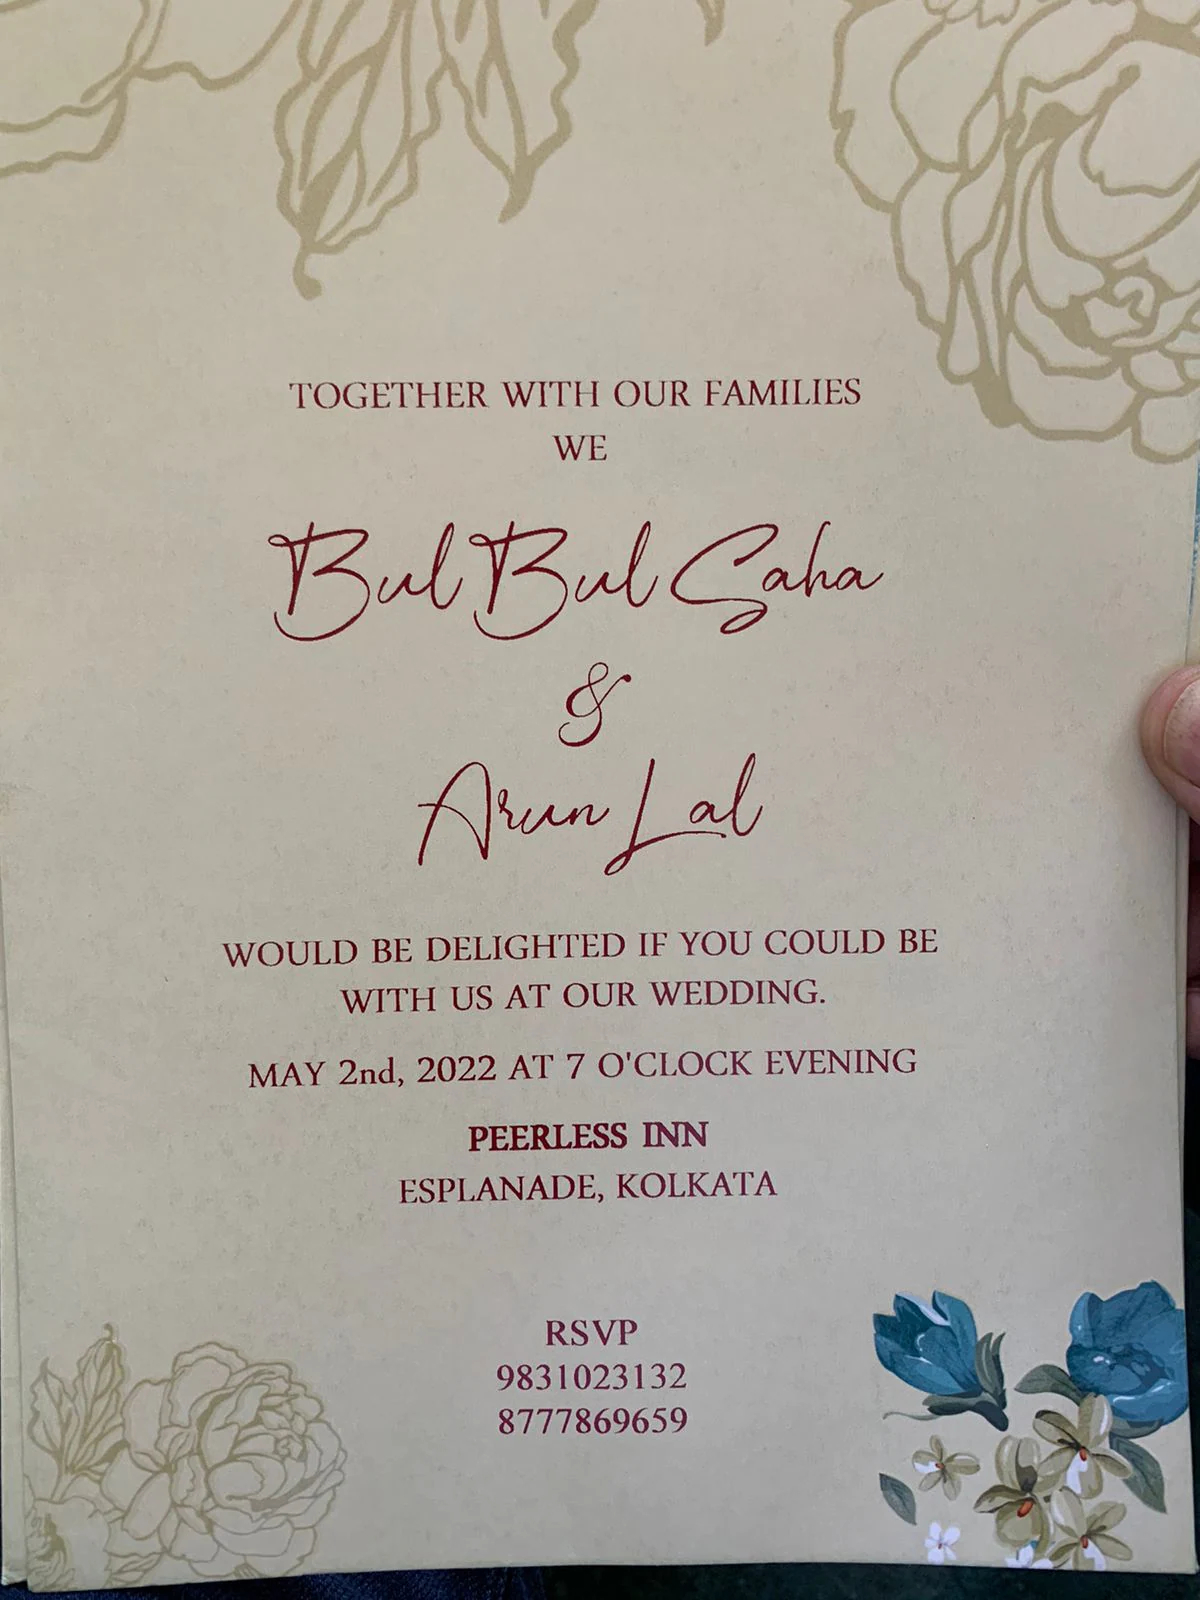 Invitation of Arun Lal's second marriage | Twitter